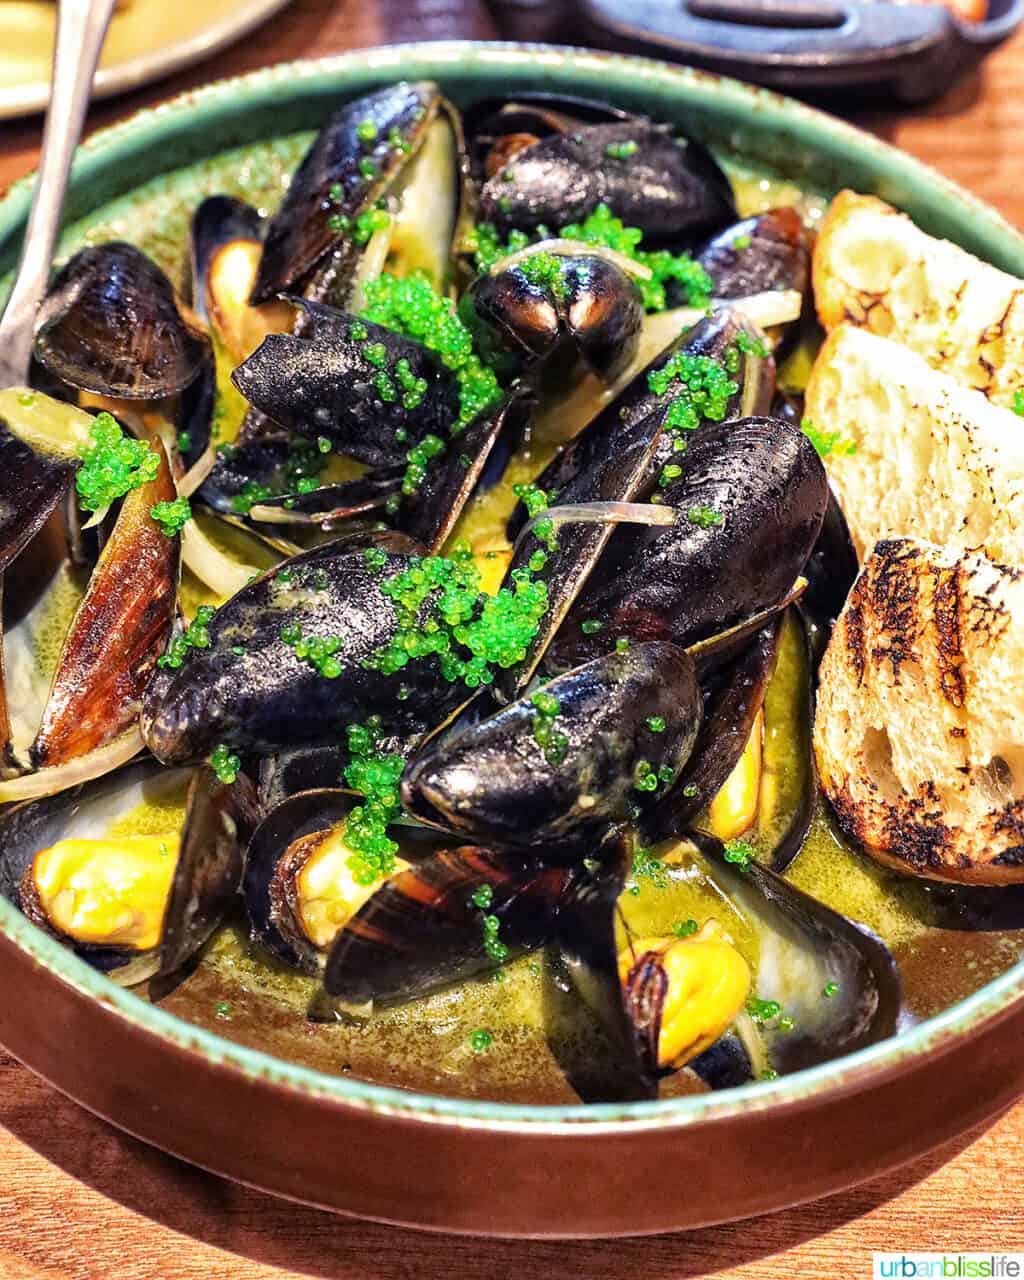 green tea mussels with bread in a bowl.